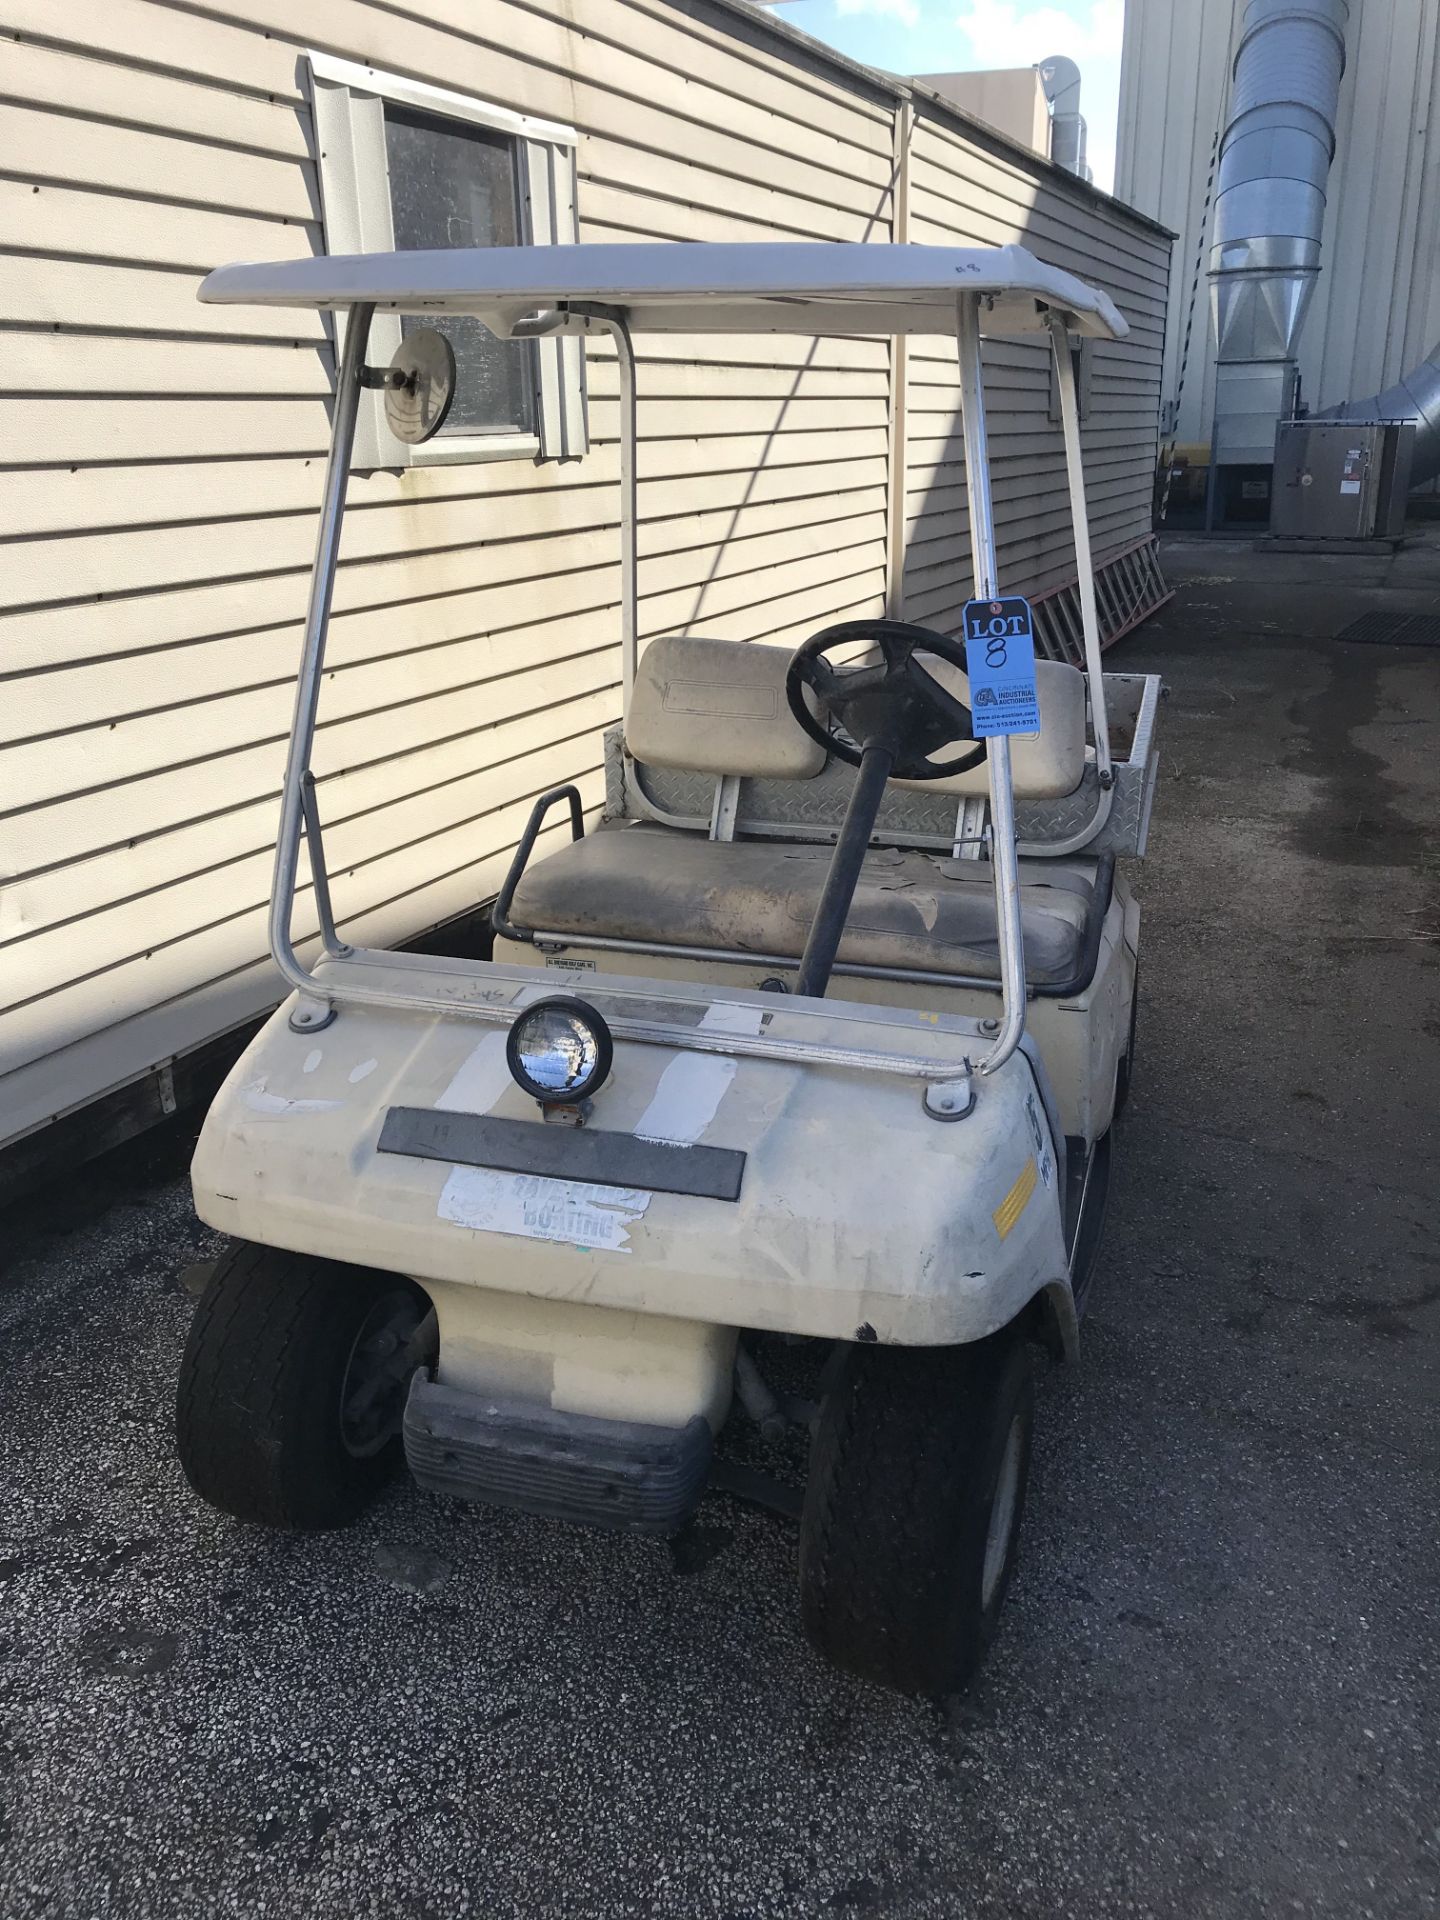 CLUB CAR ELECTRIC GOLF CART; S/N A9435-398658, 30" X 42" WORK BED **LOCATED AT 350 SEA RAY DR.,